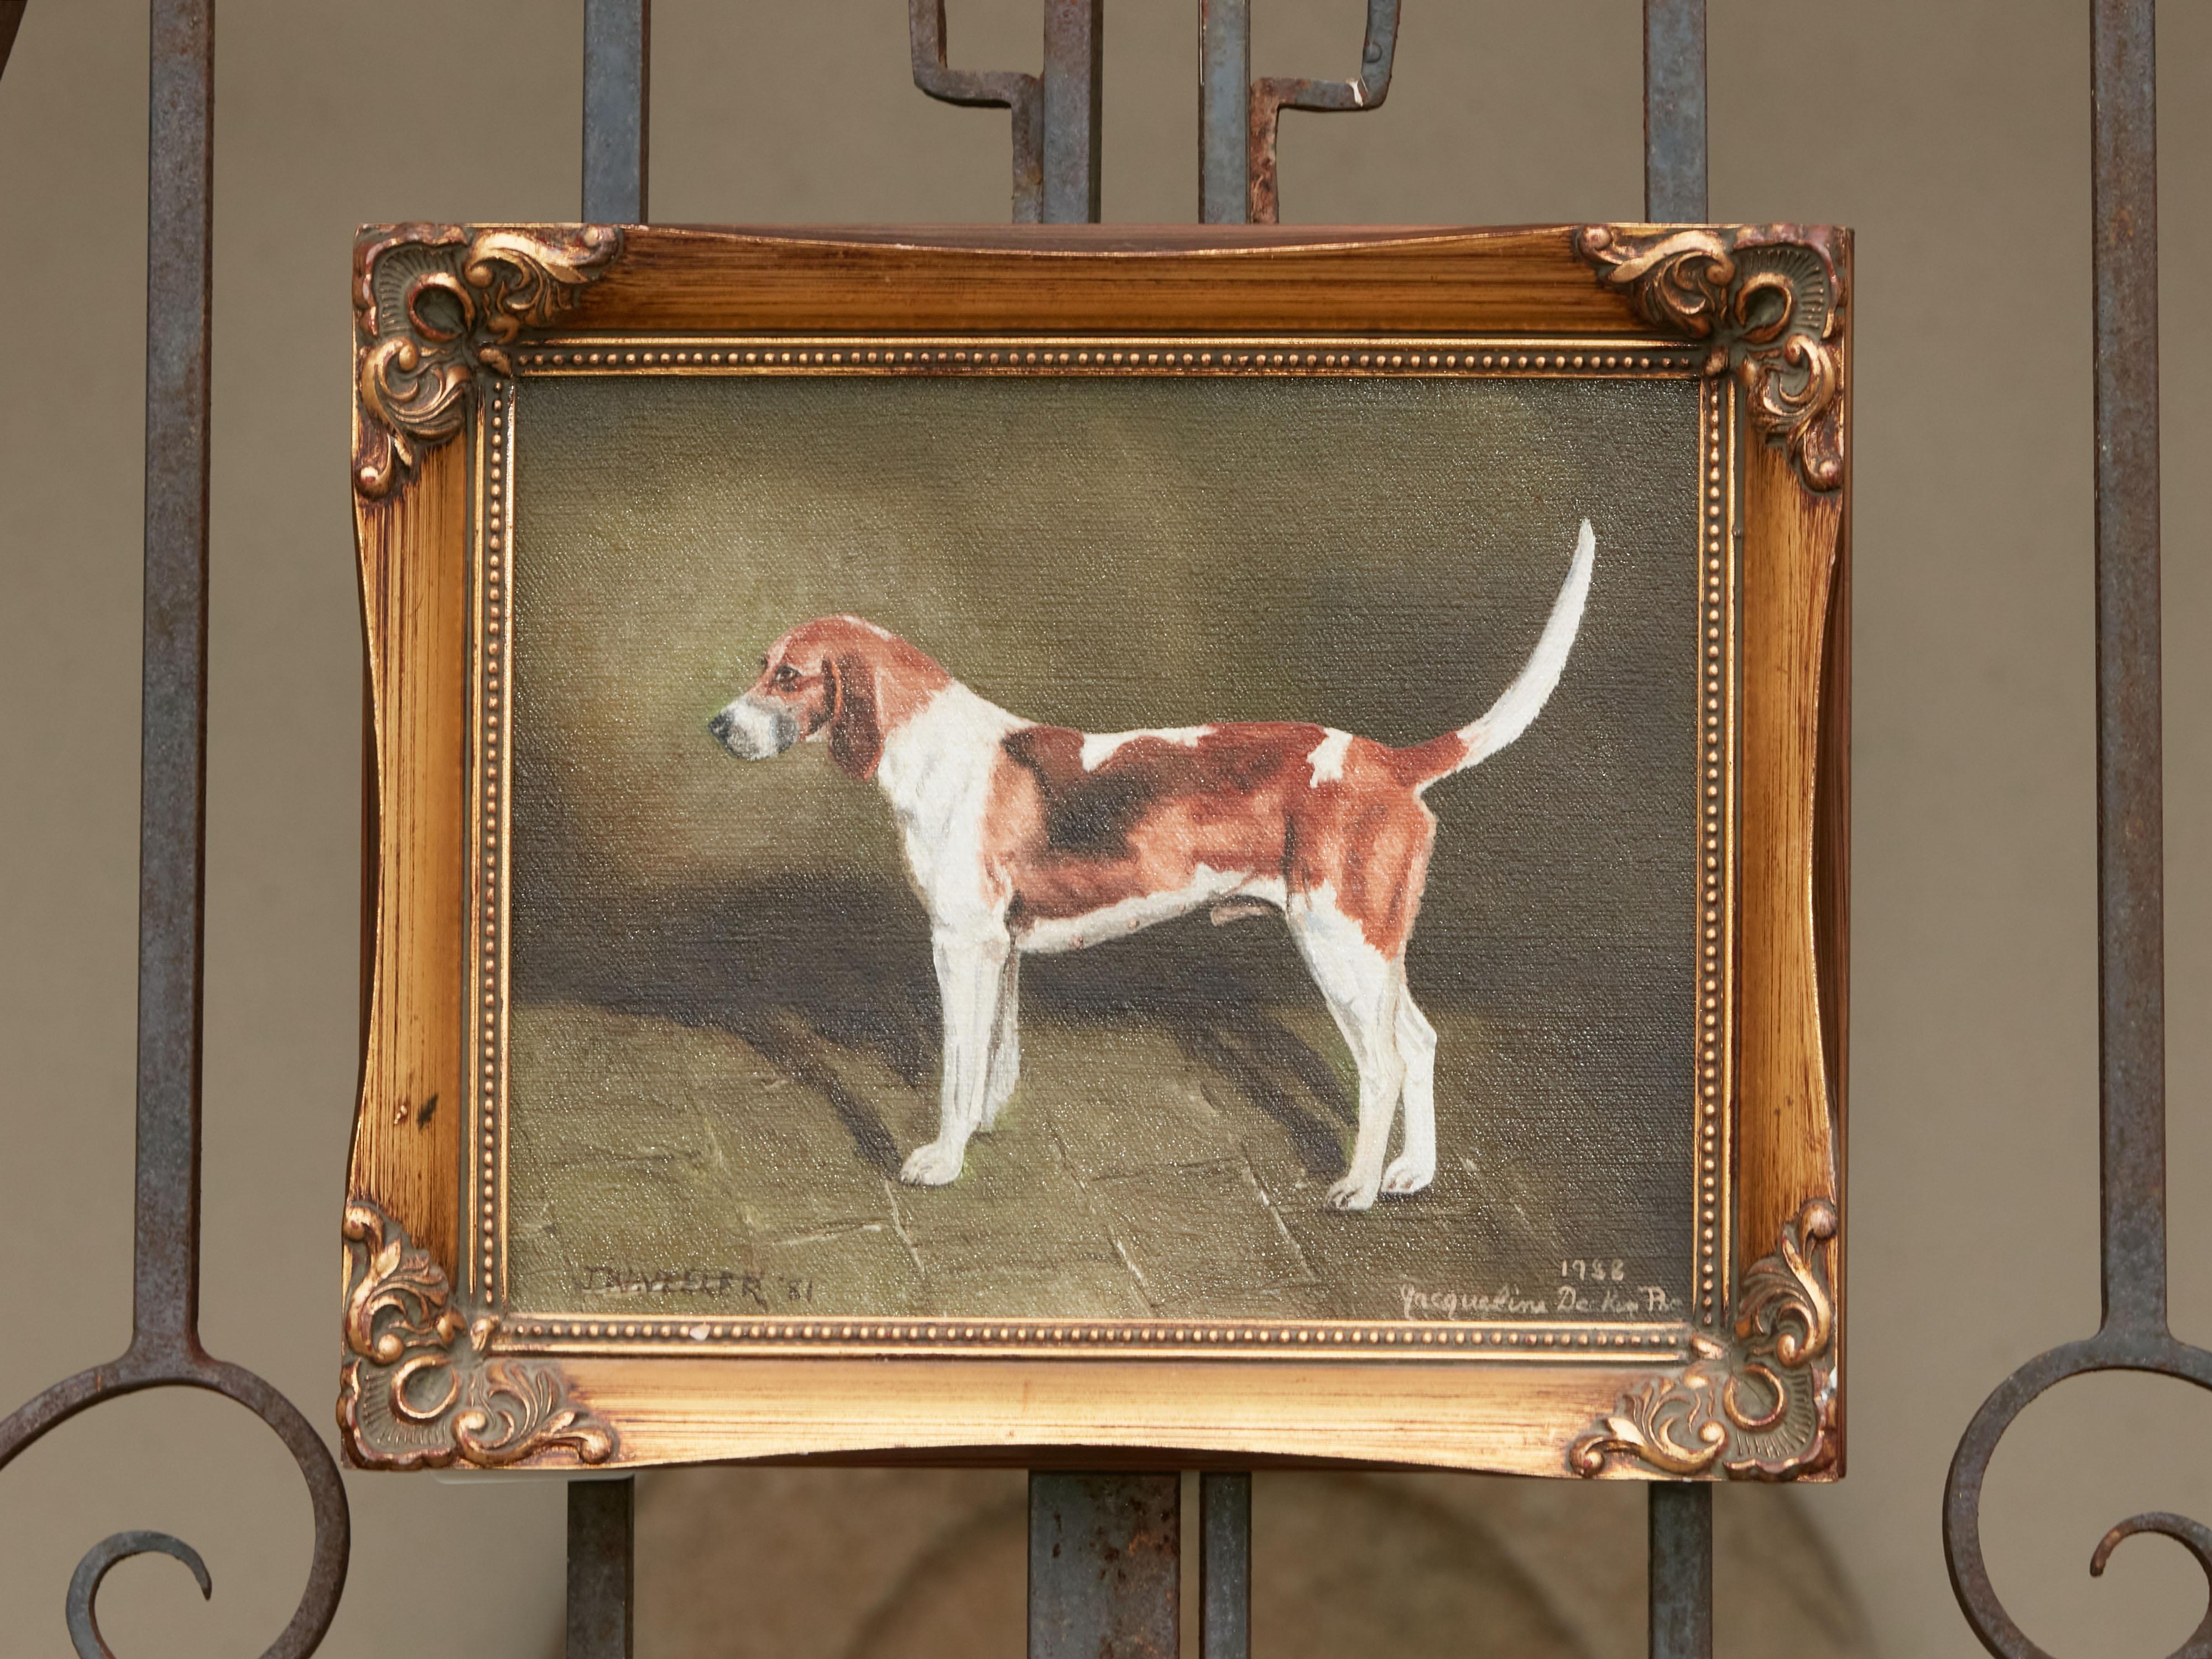 An American oil on canvas dog painting from the late 20th century depicting a Belvoir hound, signed Jacqueline Decker. Created during the last quarter of the 20th century, this rectangular oil on canvas painting boasts an undeniable air of